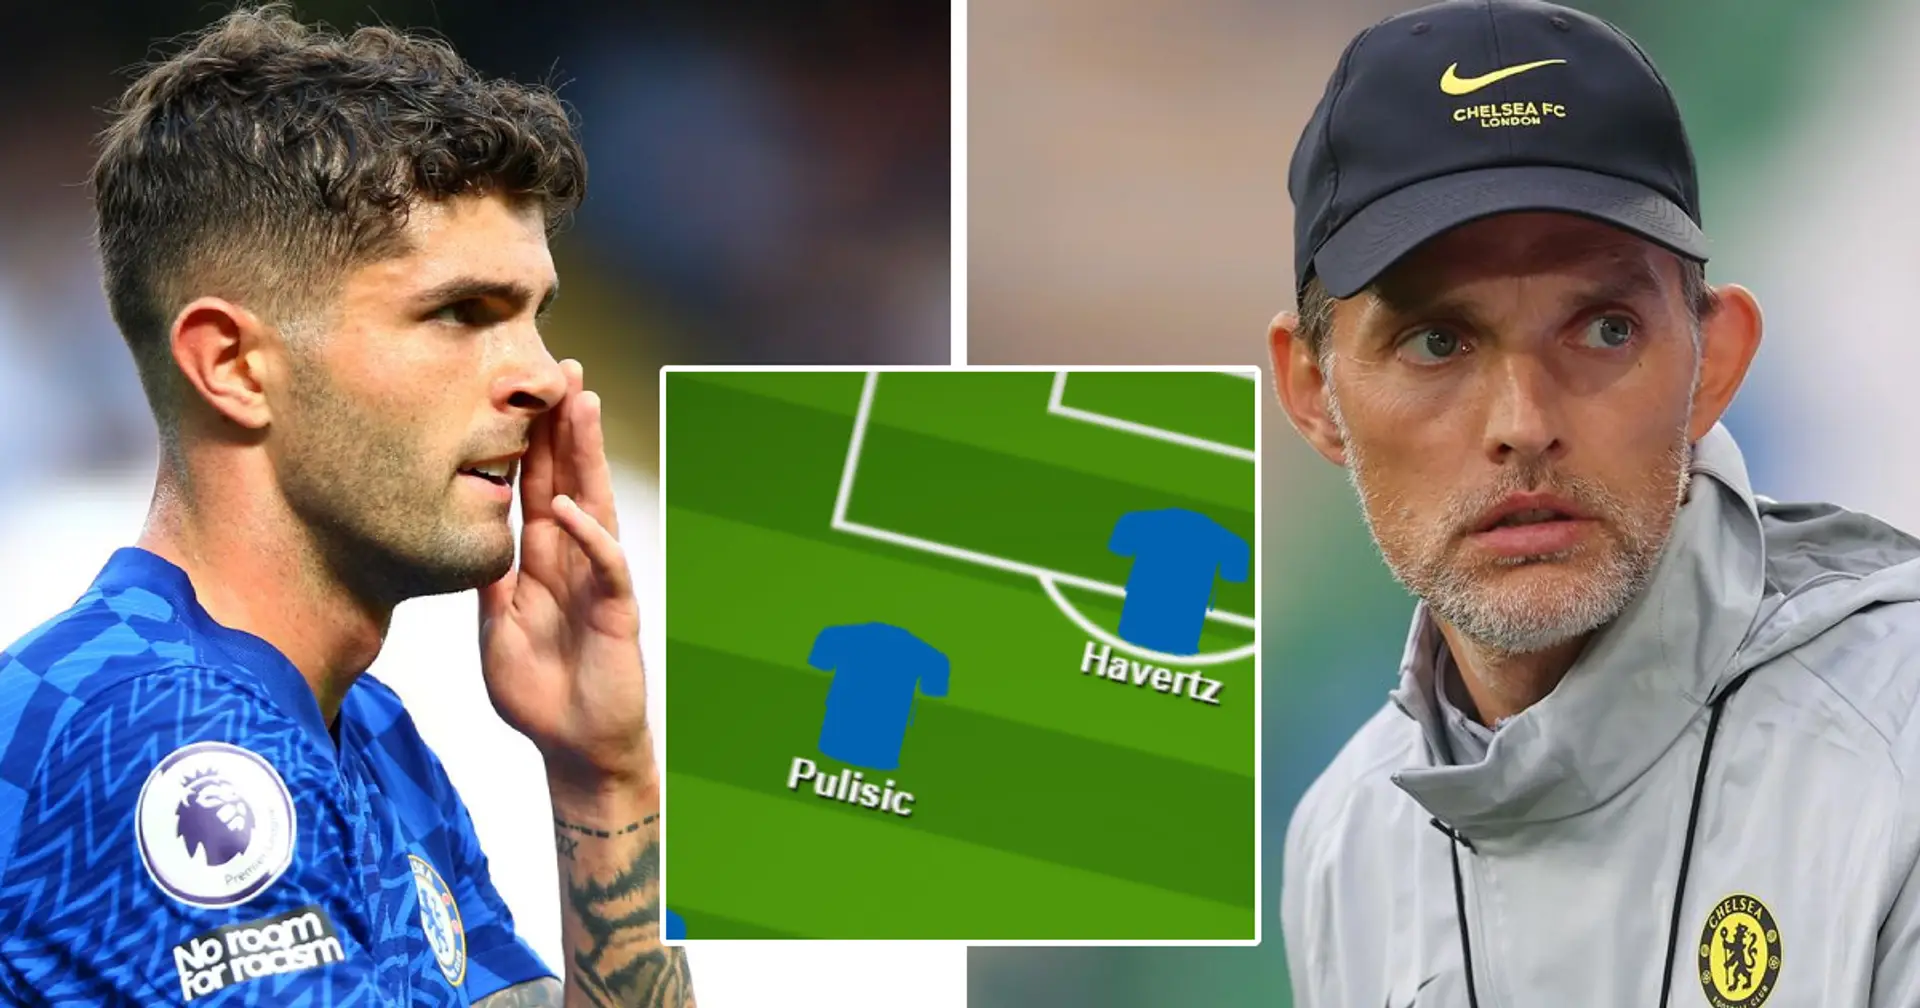 Pulisic to start? Alonso back in? Select your ultimate XI for Malmo game from 2 options